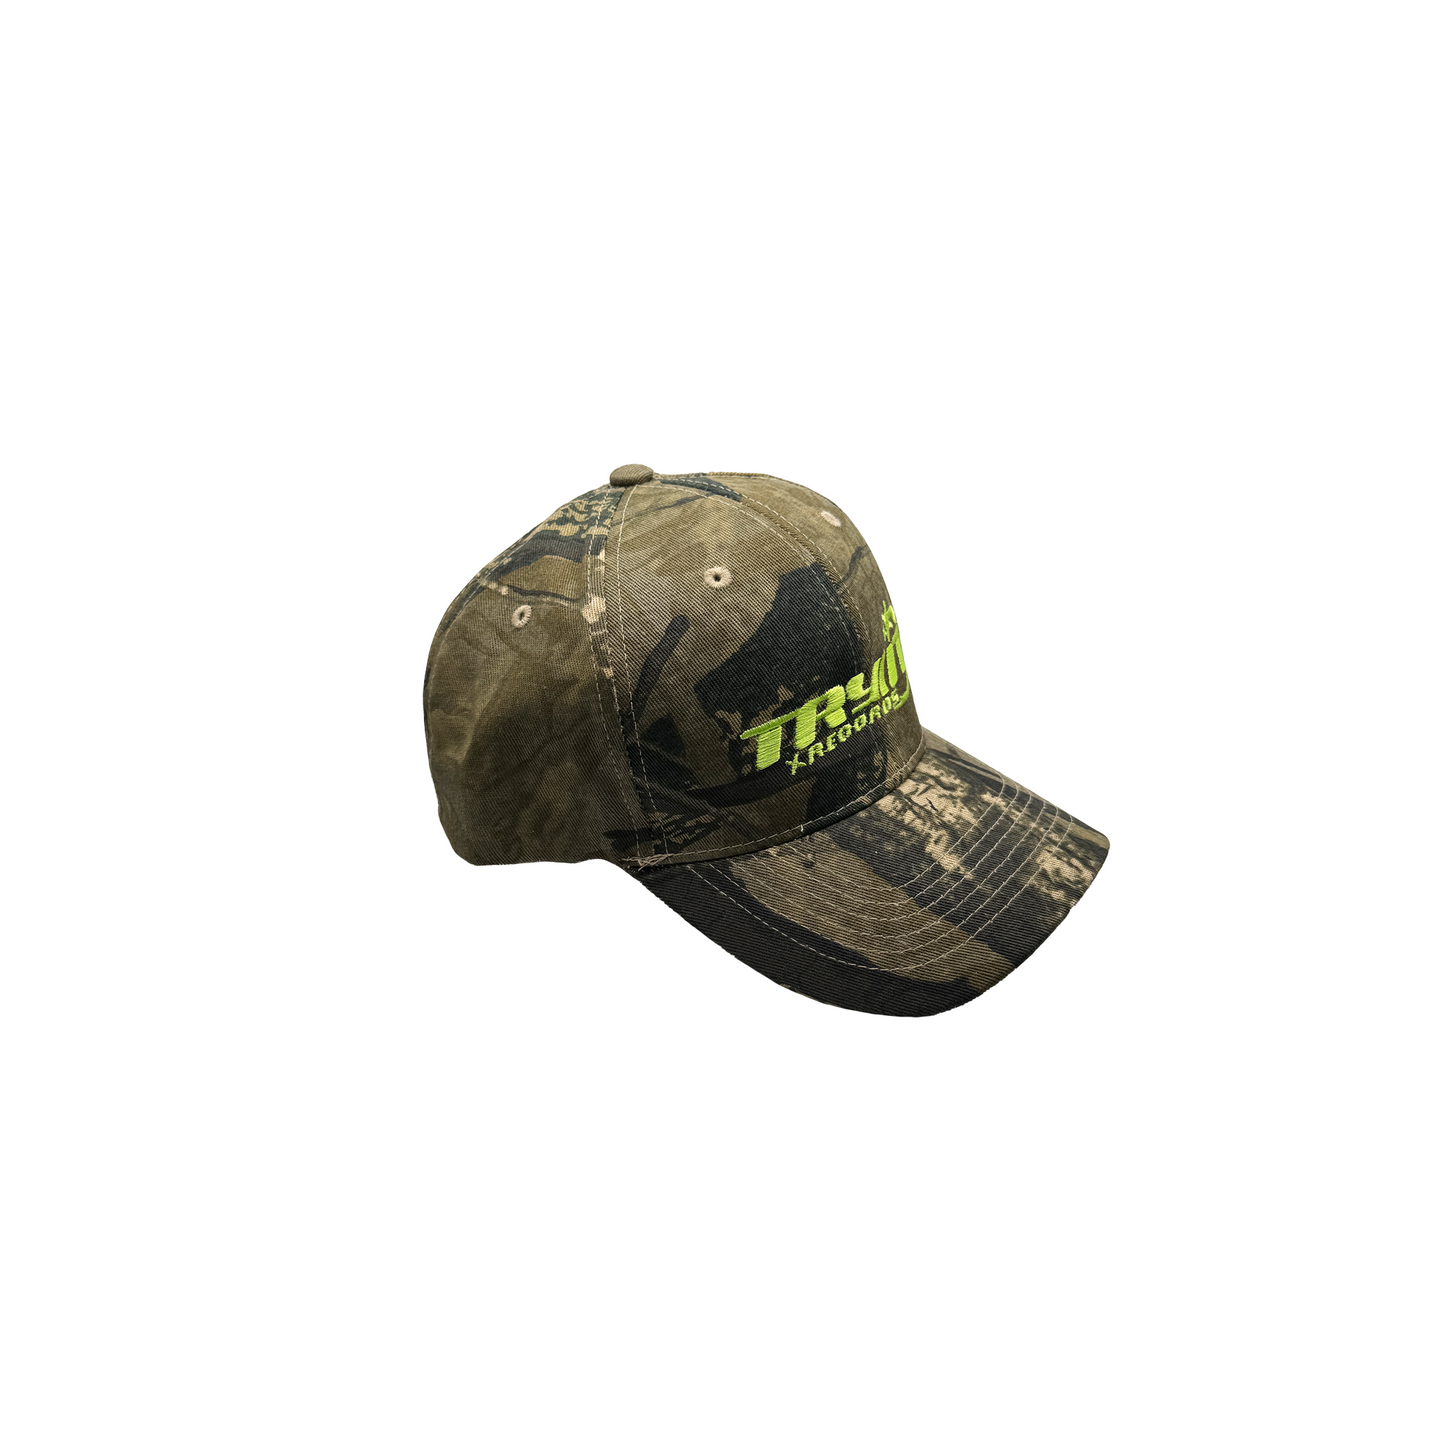 Records RealTree Hat (neon green)